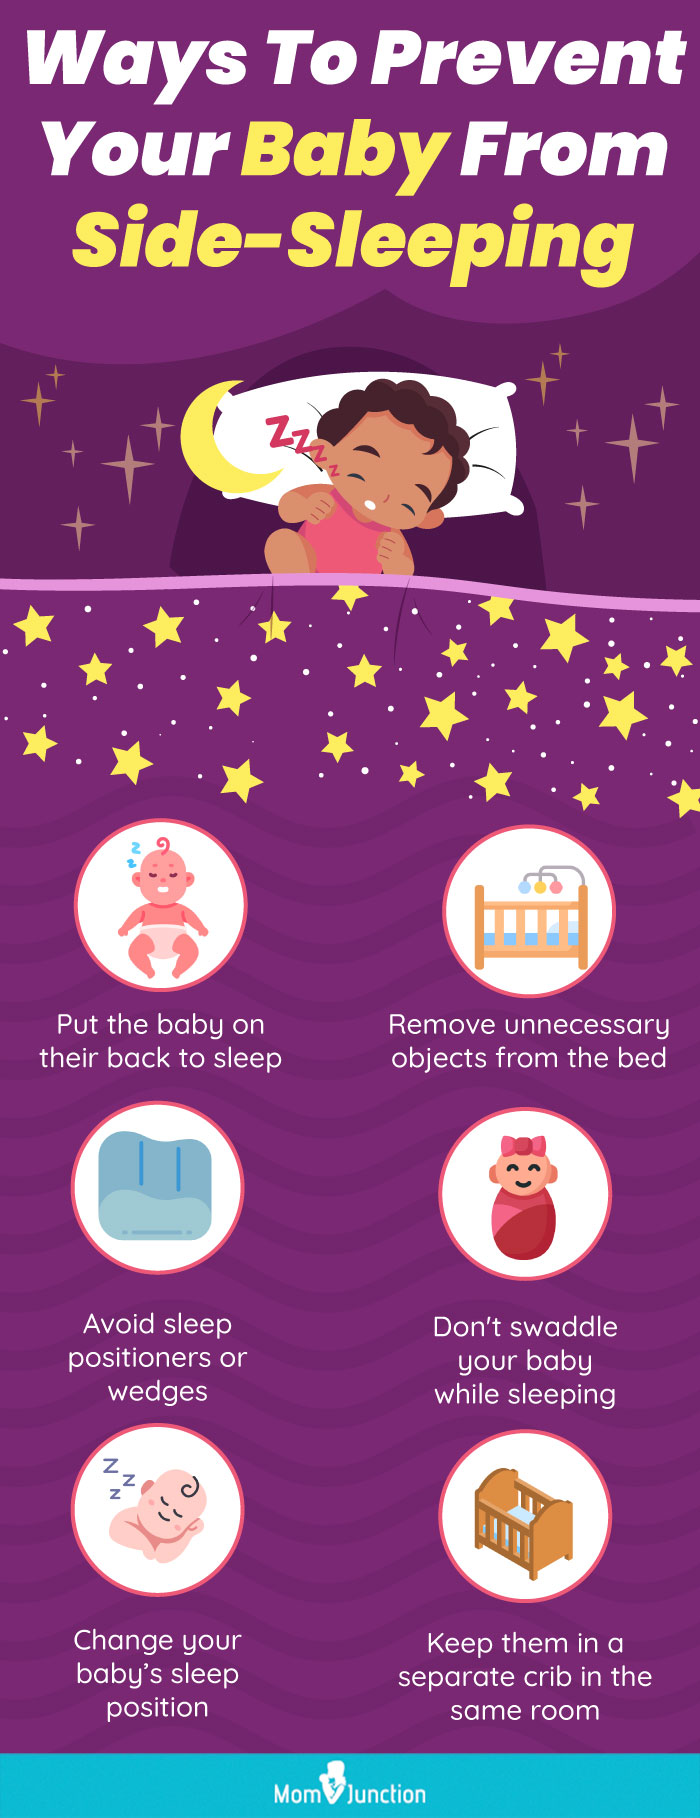 ways to prevent your baby from side sleeping (infographic)